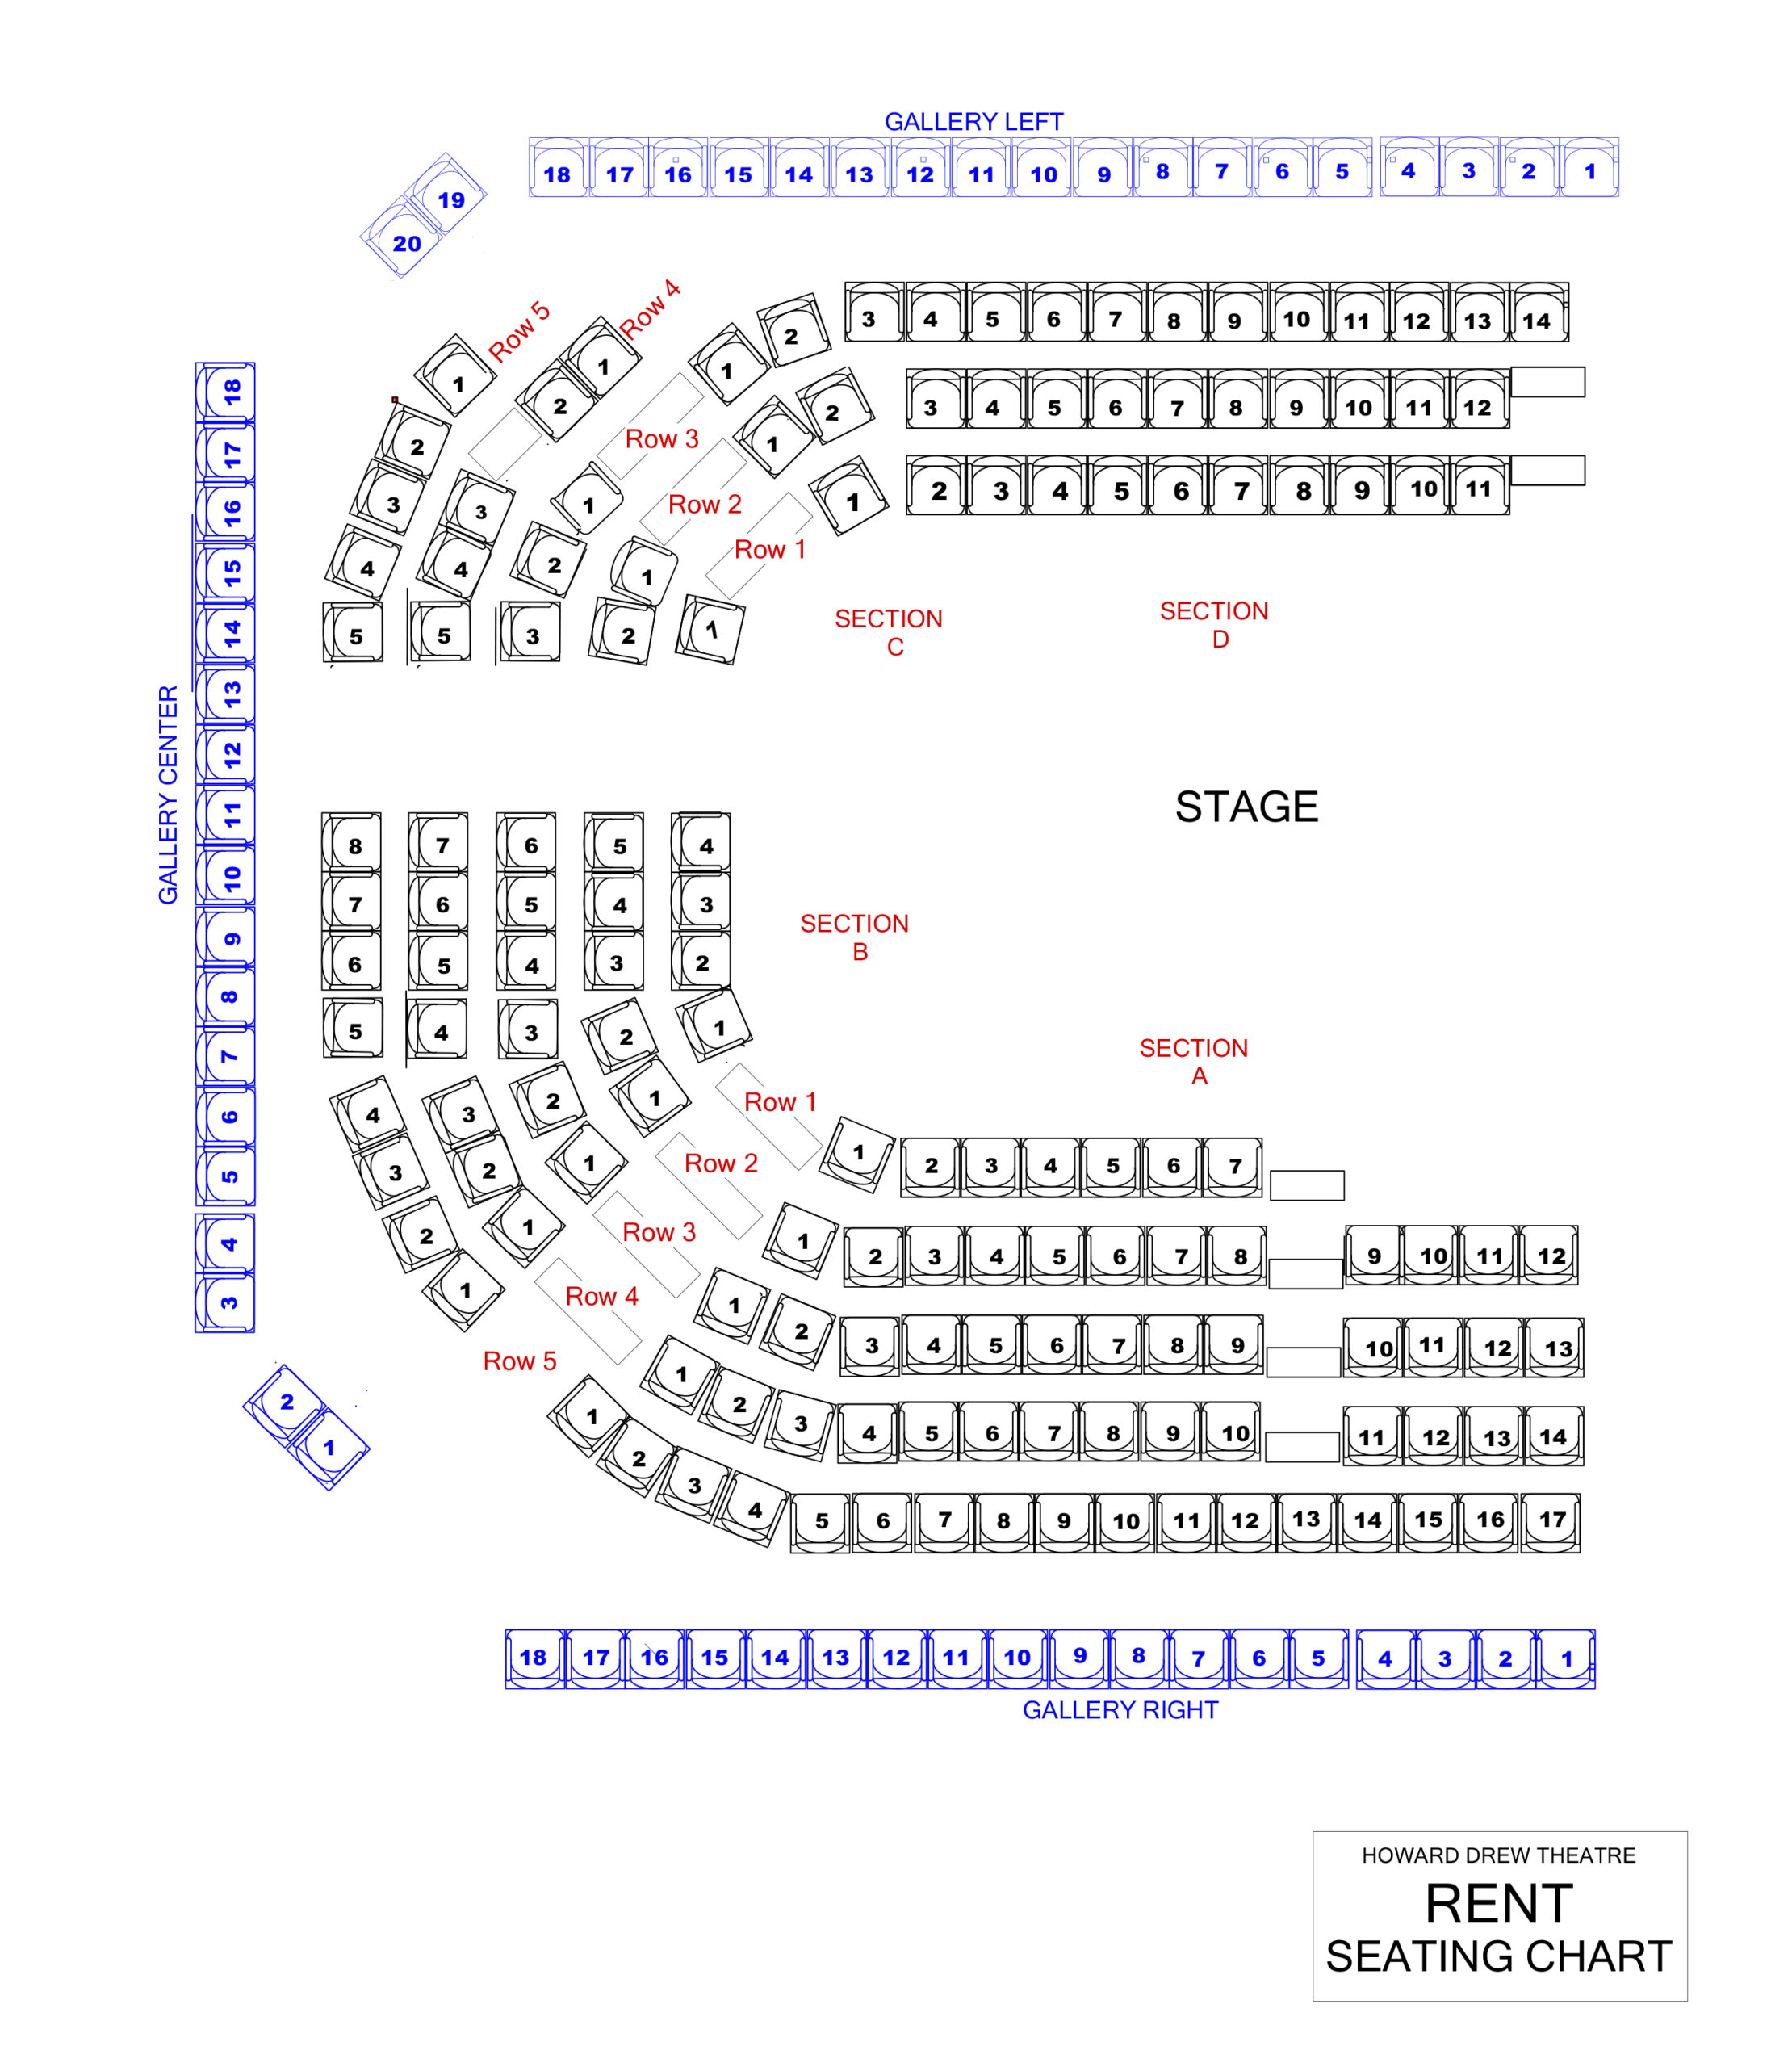 Howard Drew Theatre Seating Chart for RENT